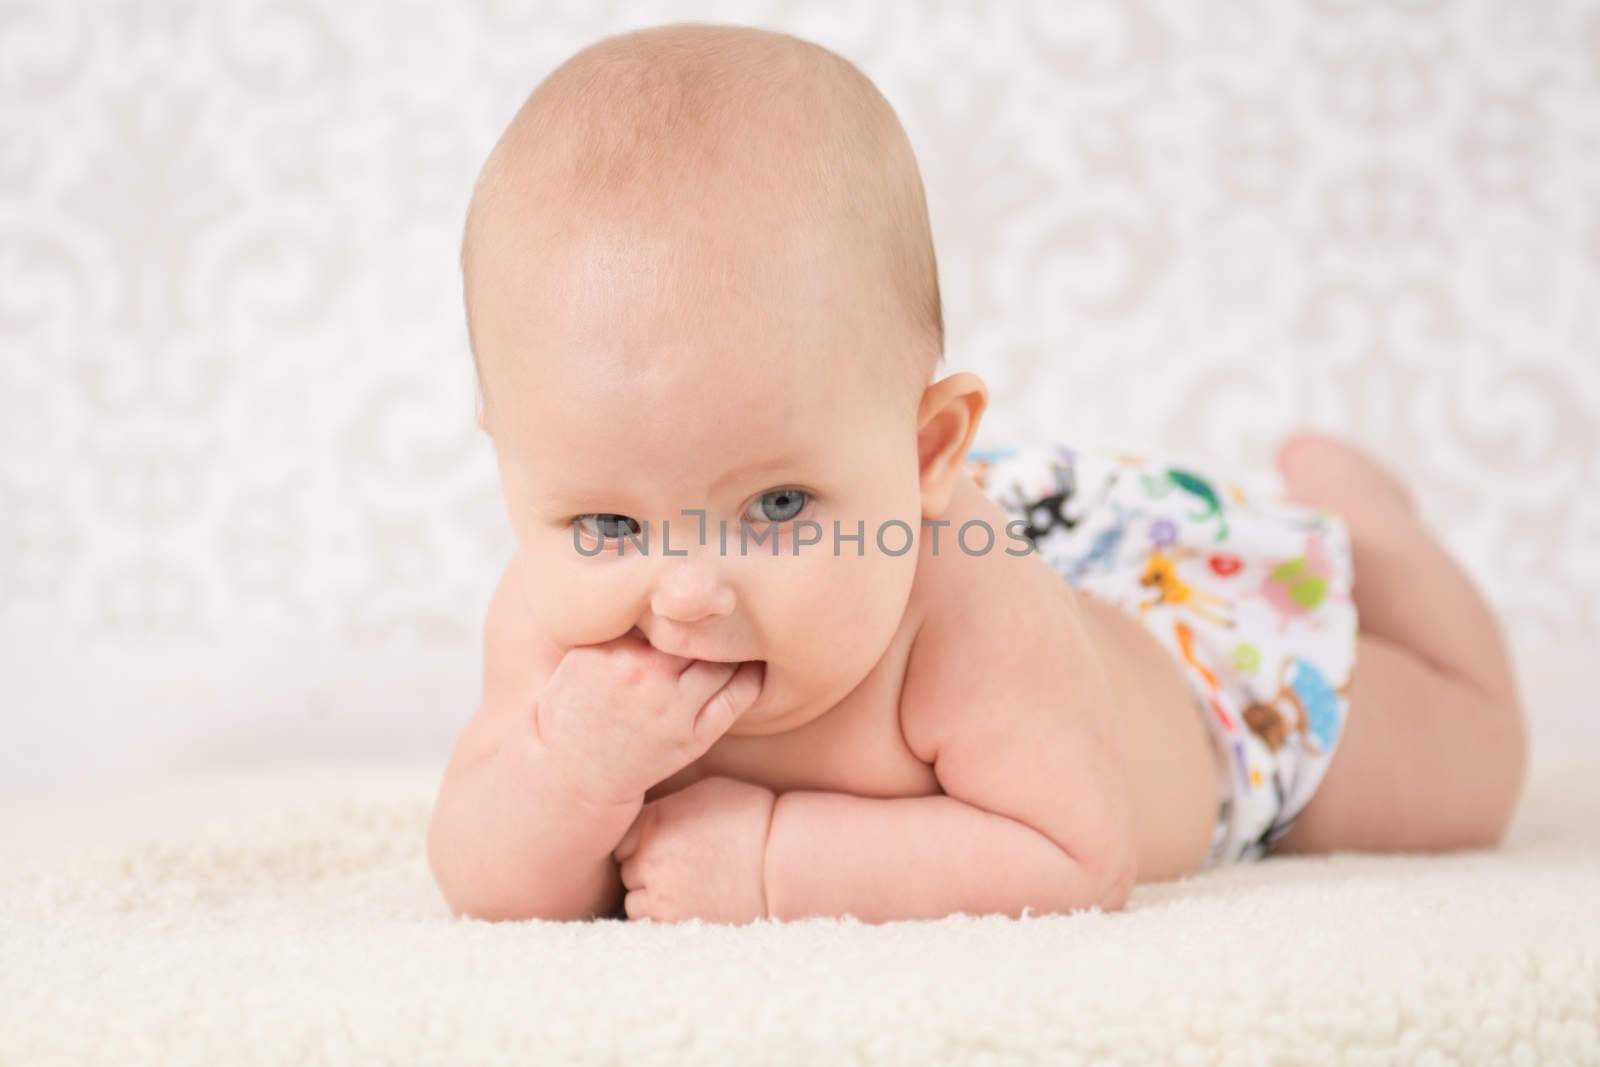 Baby in a reusable nappy, lying on a belly on a light background, bitting her fist